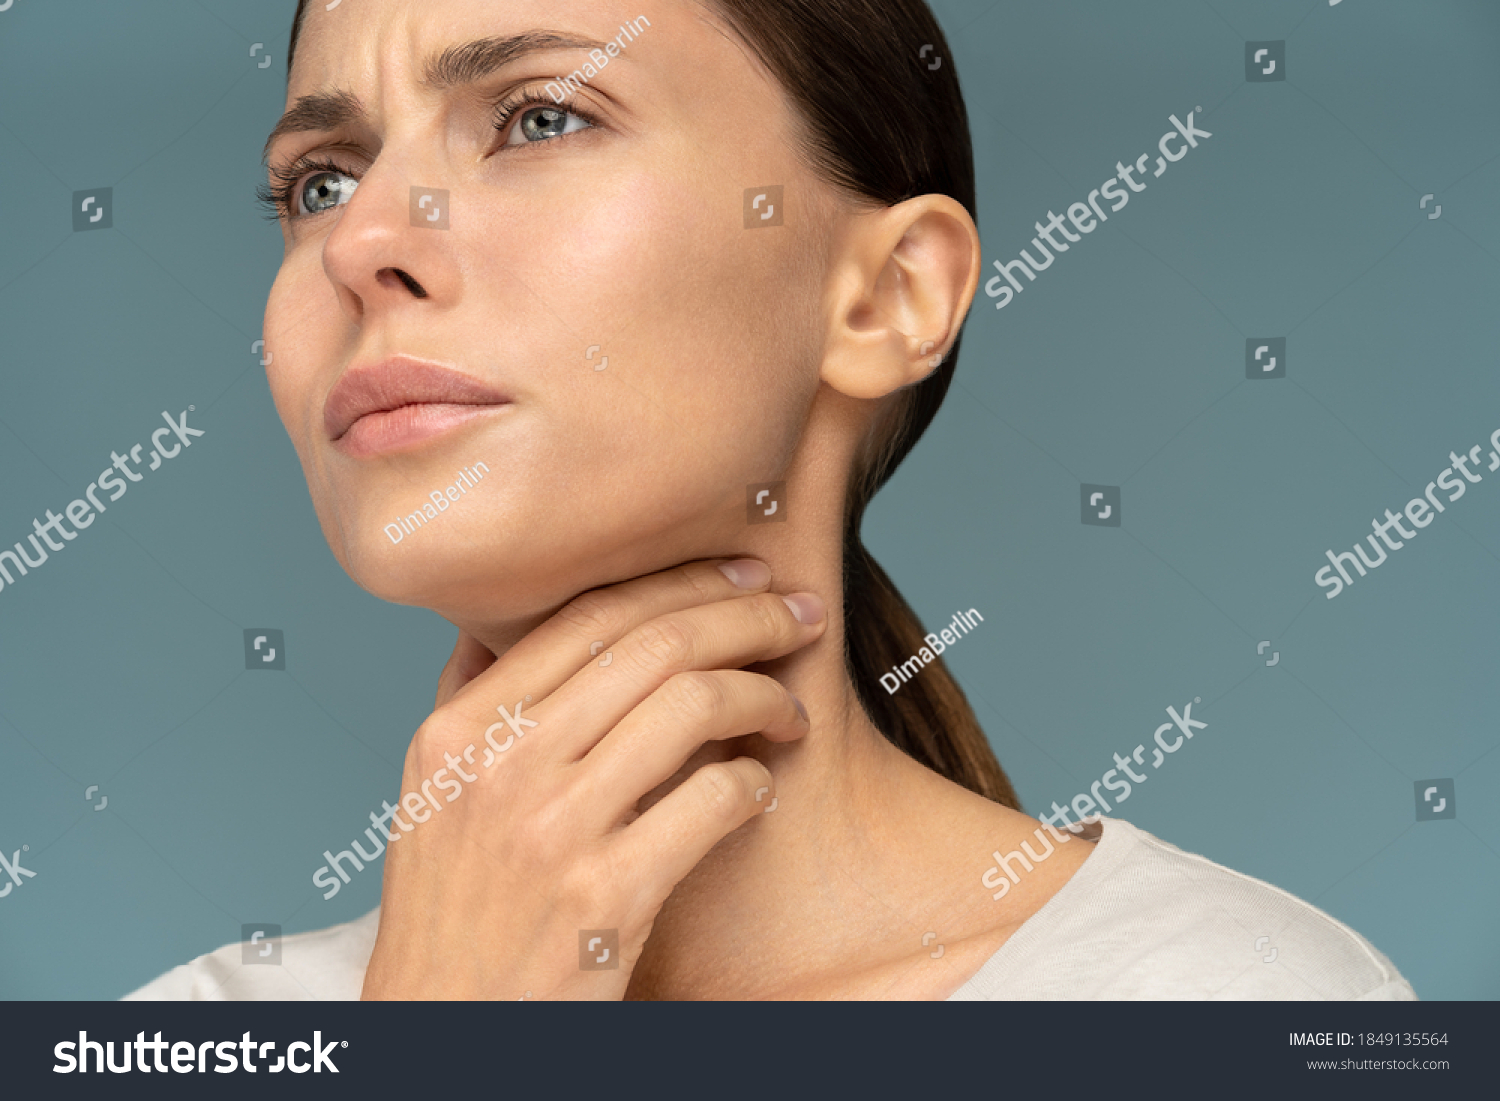 Closeup of sick woman having sore throat, tonsillitis, feeling sick, caught cold, suffering from painful swallowing, strong pain in throat, holding hand on her neck, isolated on studio blue background #1849135564